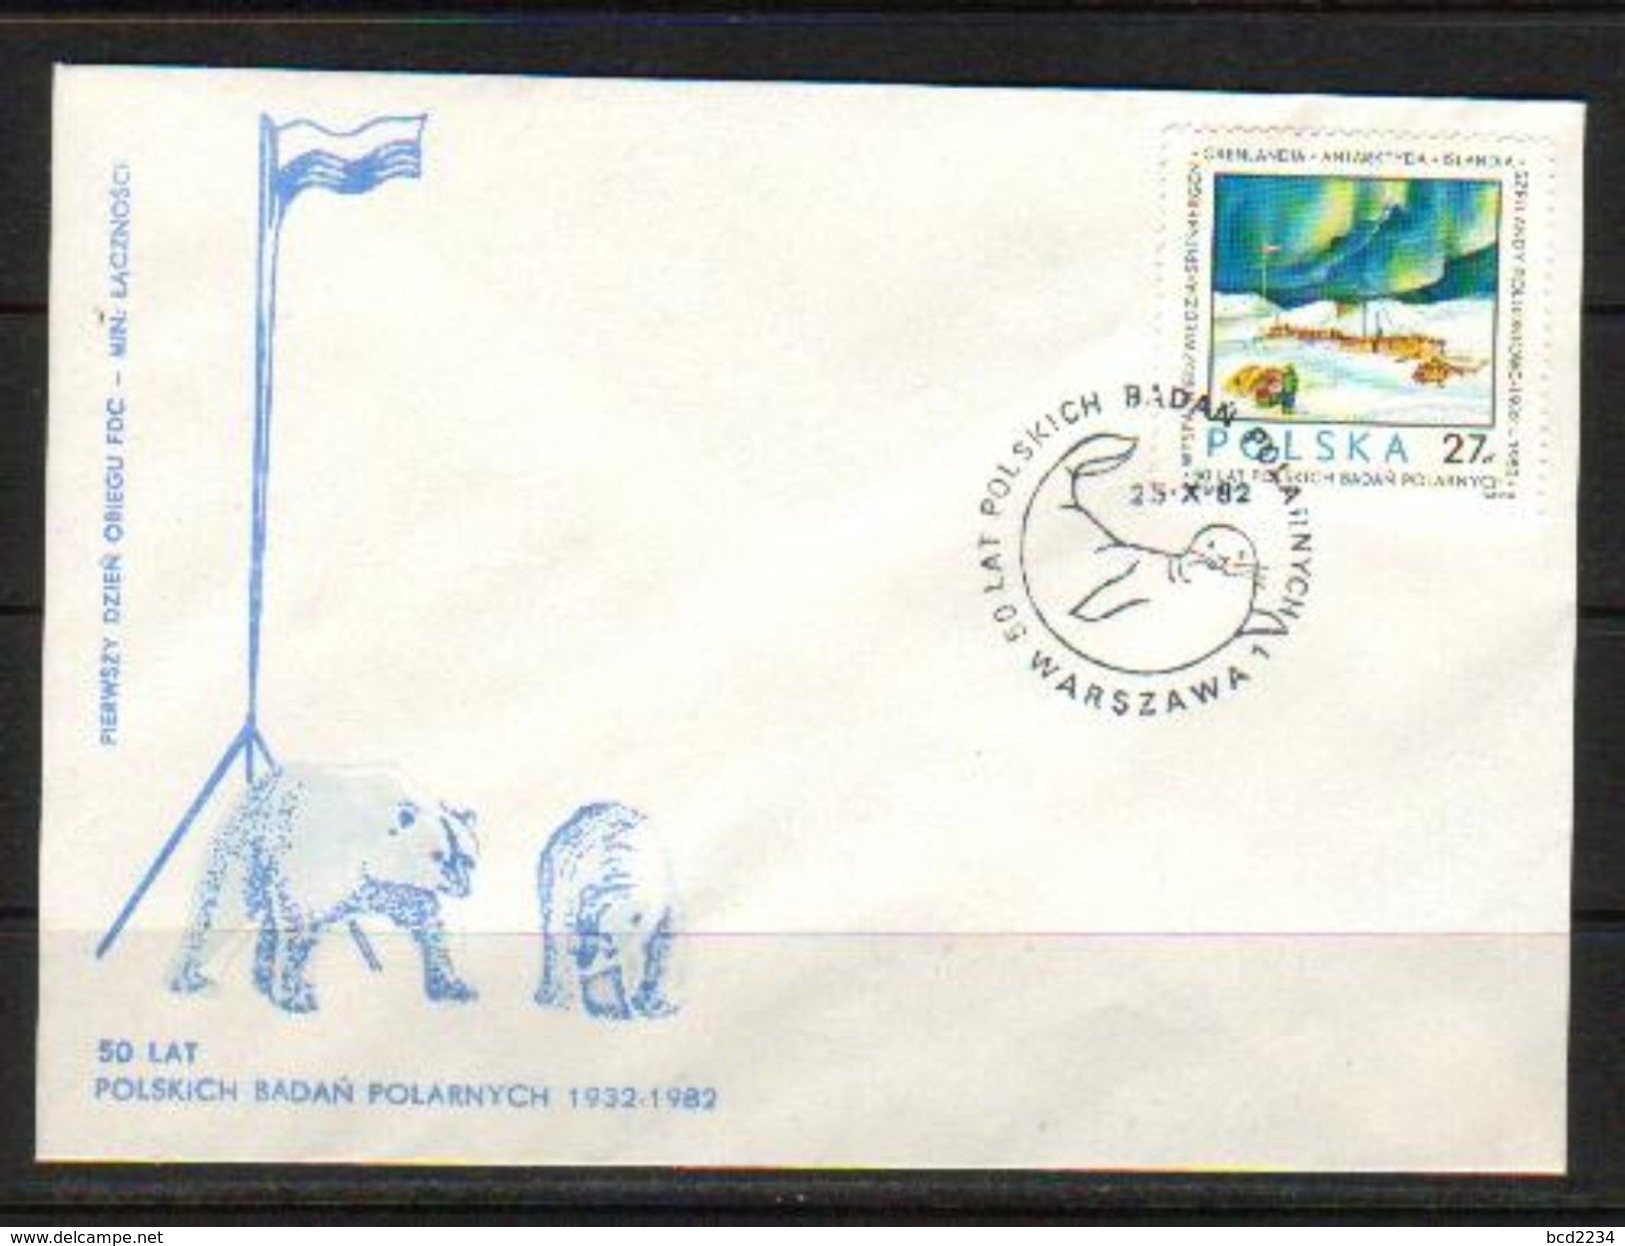 POLAND FDC 1982 50TH ANNIVERSARY POLISH POLAR RESEARCH EXPEDITIONS ANTARCTIC BEAR HELICOPTER SPITZBERGEN - Programmi Di Ricerca